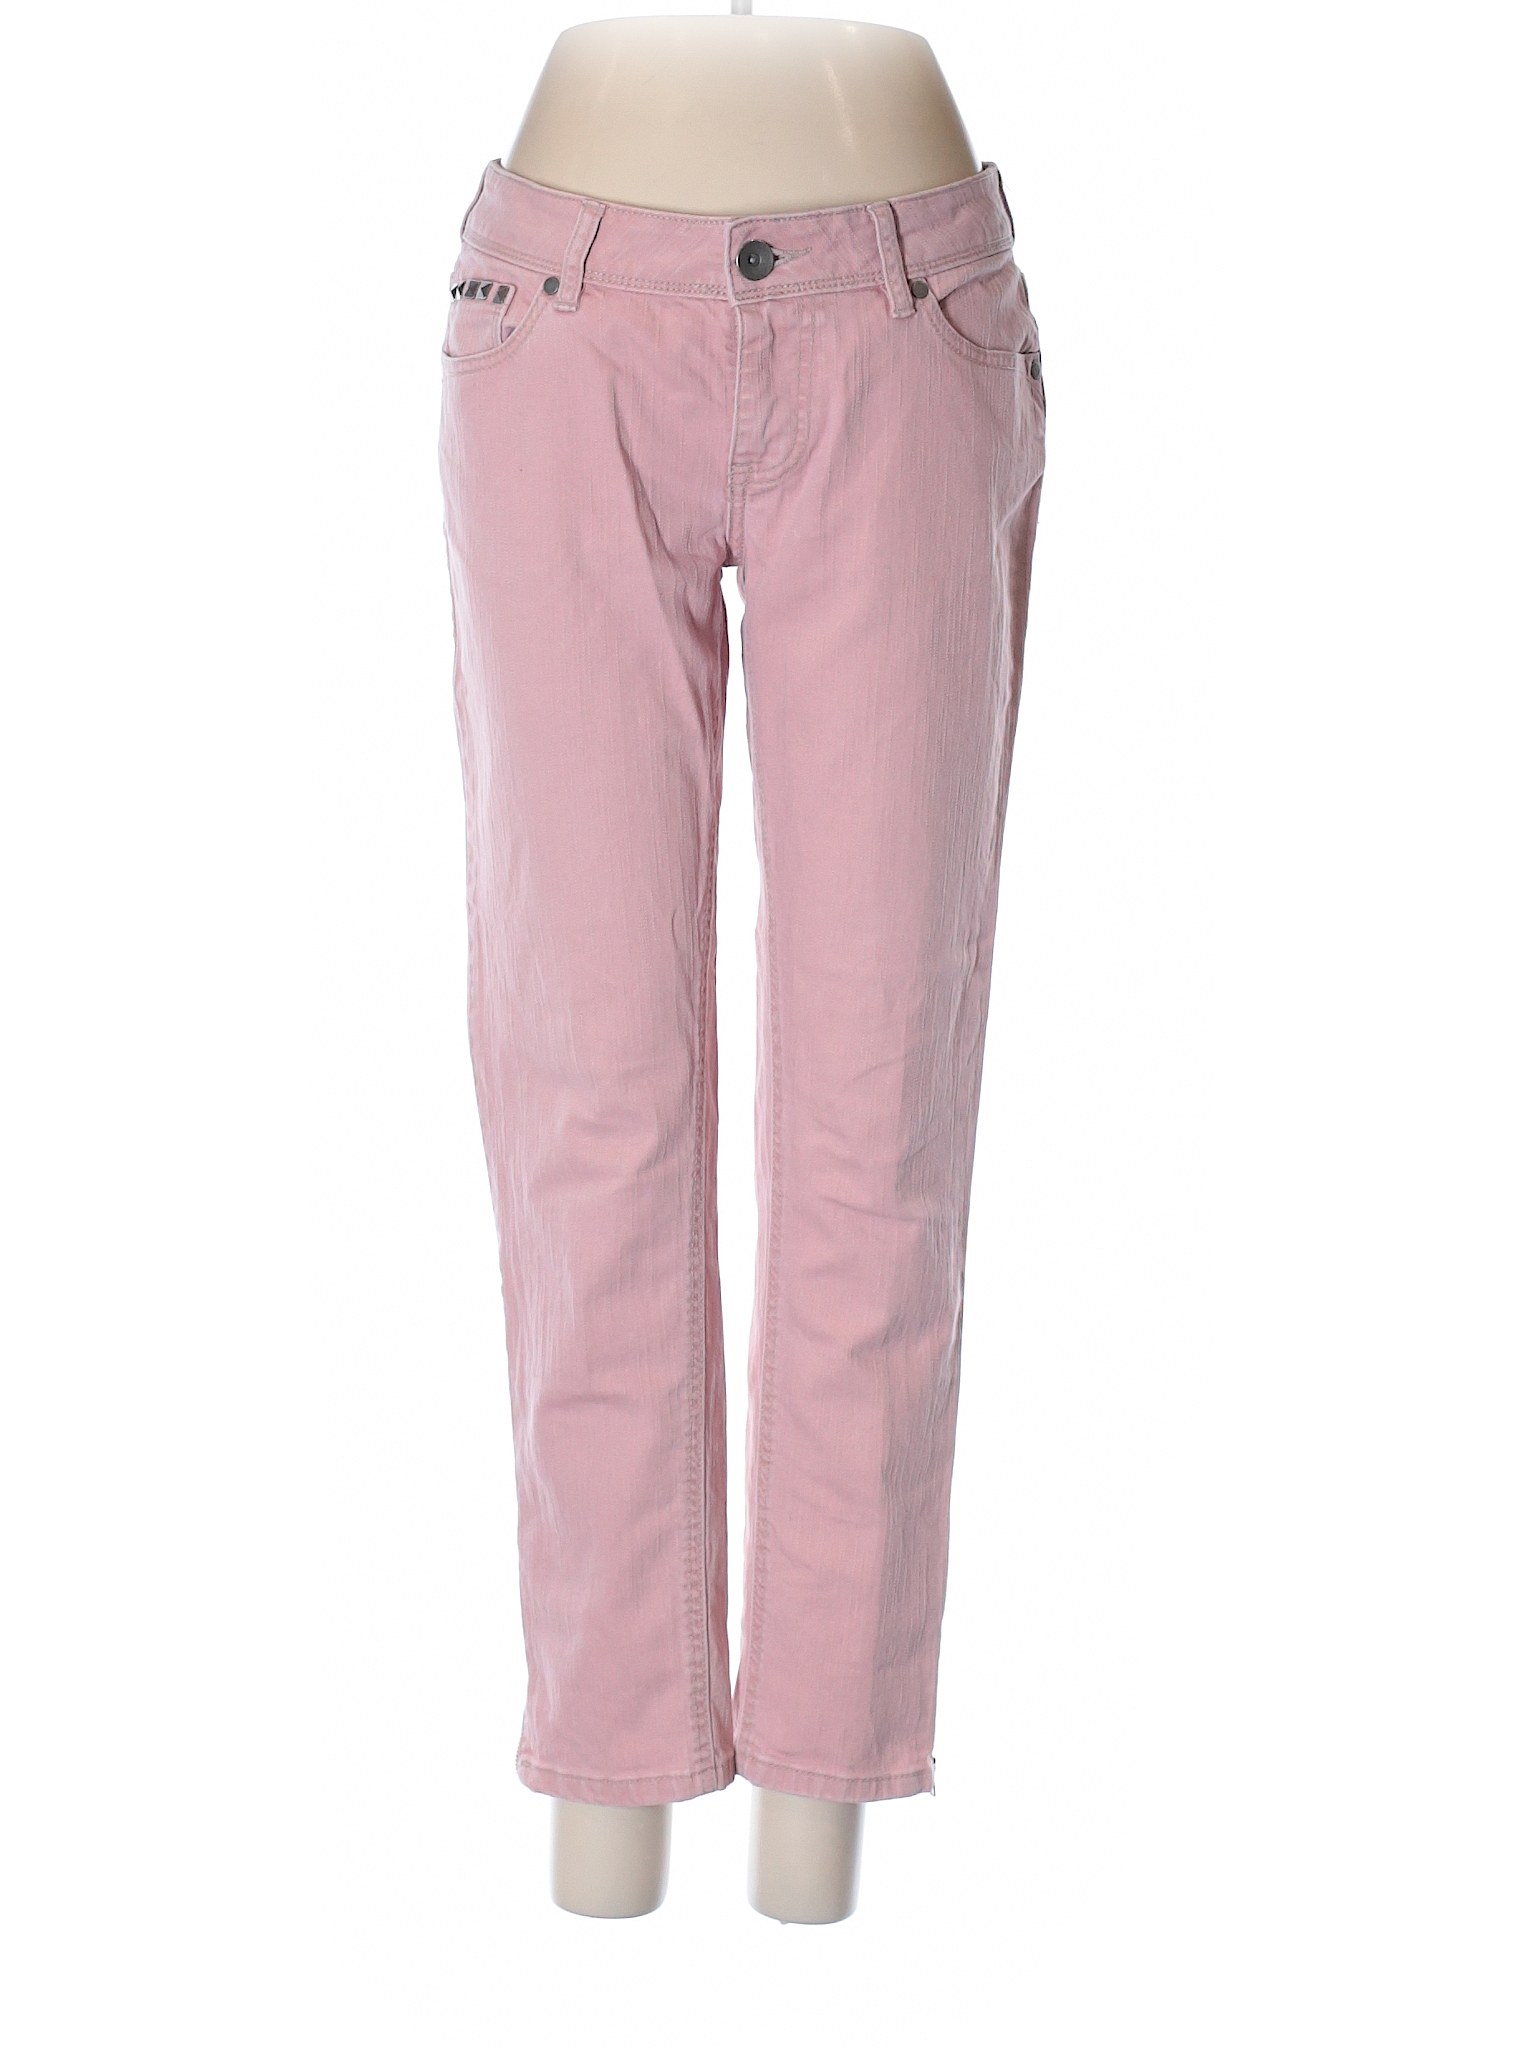 a.n.a. A New Approach Solid Pink Jeans Size 4 - 95% off | thredUP